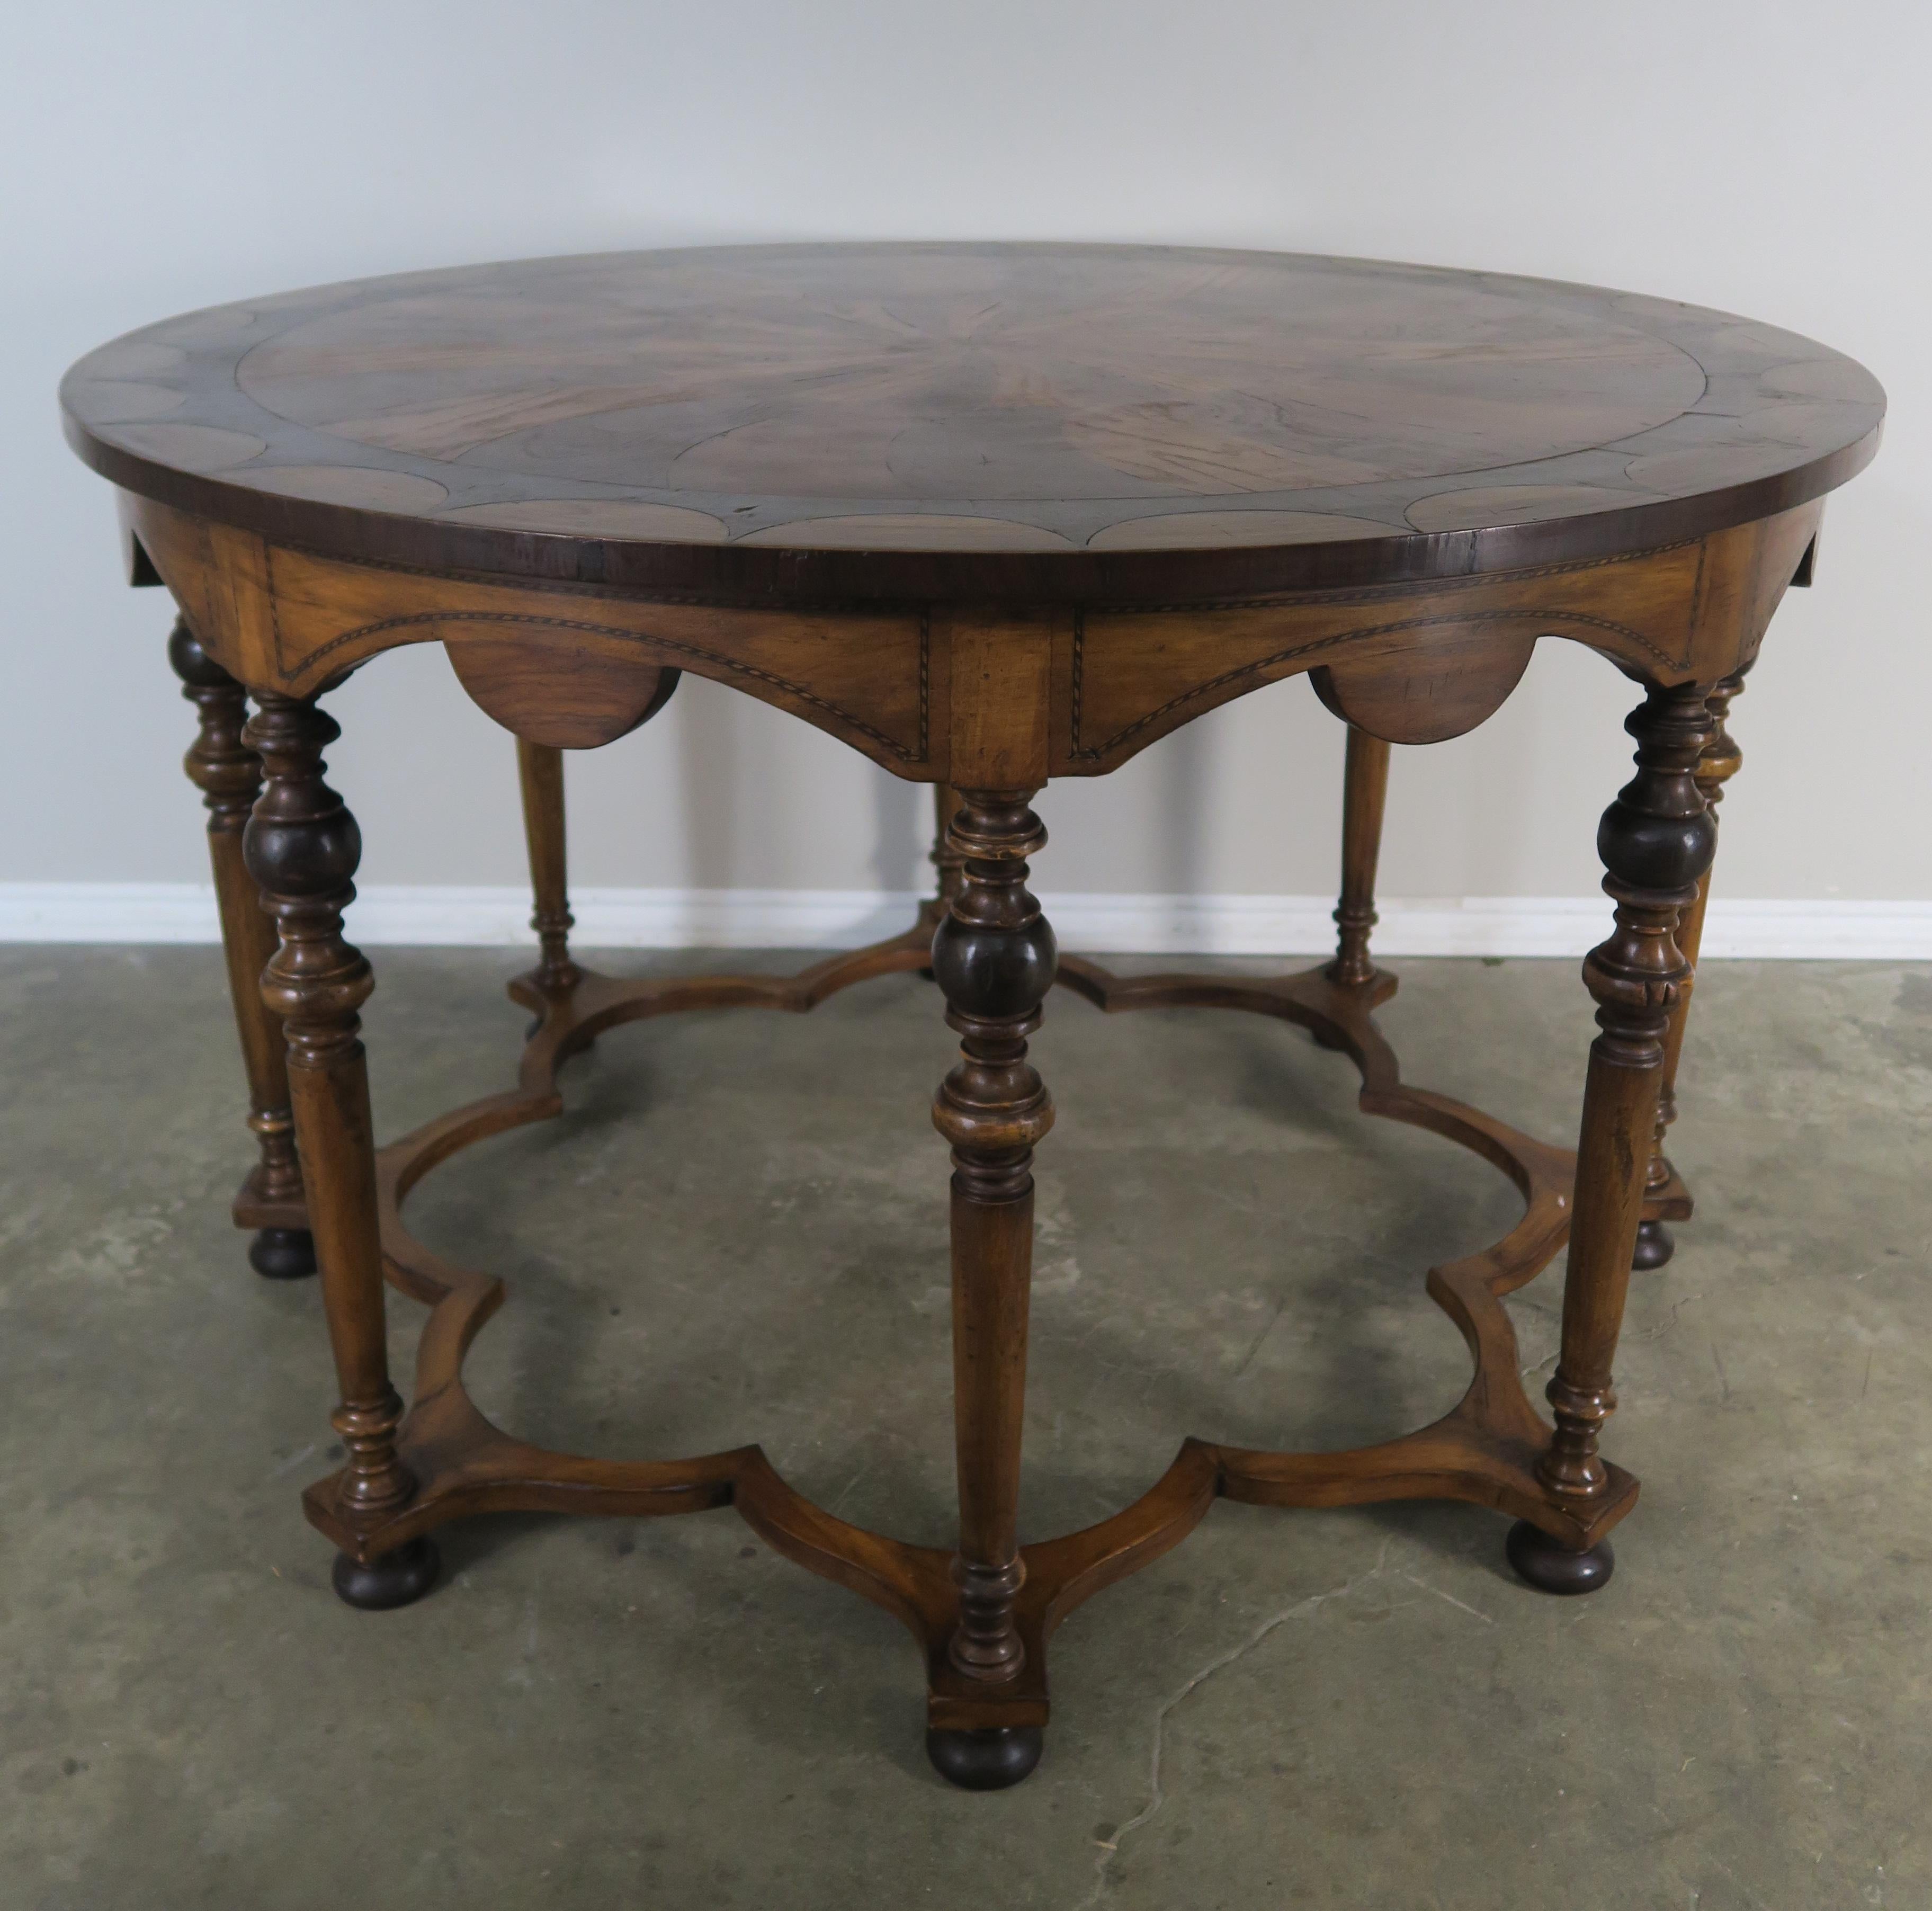 Round eight legged inlaid table with star-shaped stretcher that attaches all eight legs together. The table is made from a combination of walnut, mahogany, ebony, and elmwood carefully inlaid to create a beautiful design.